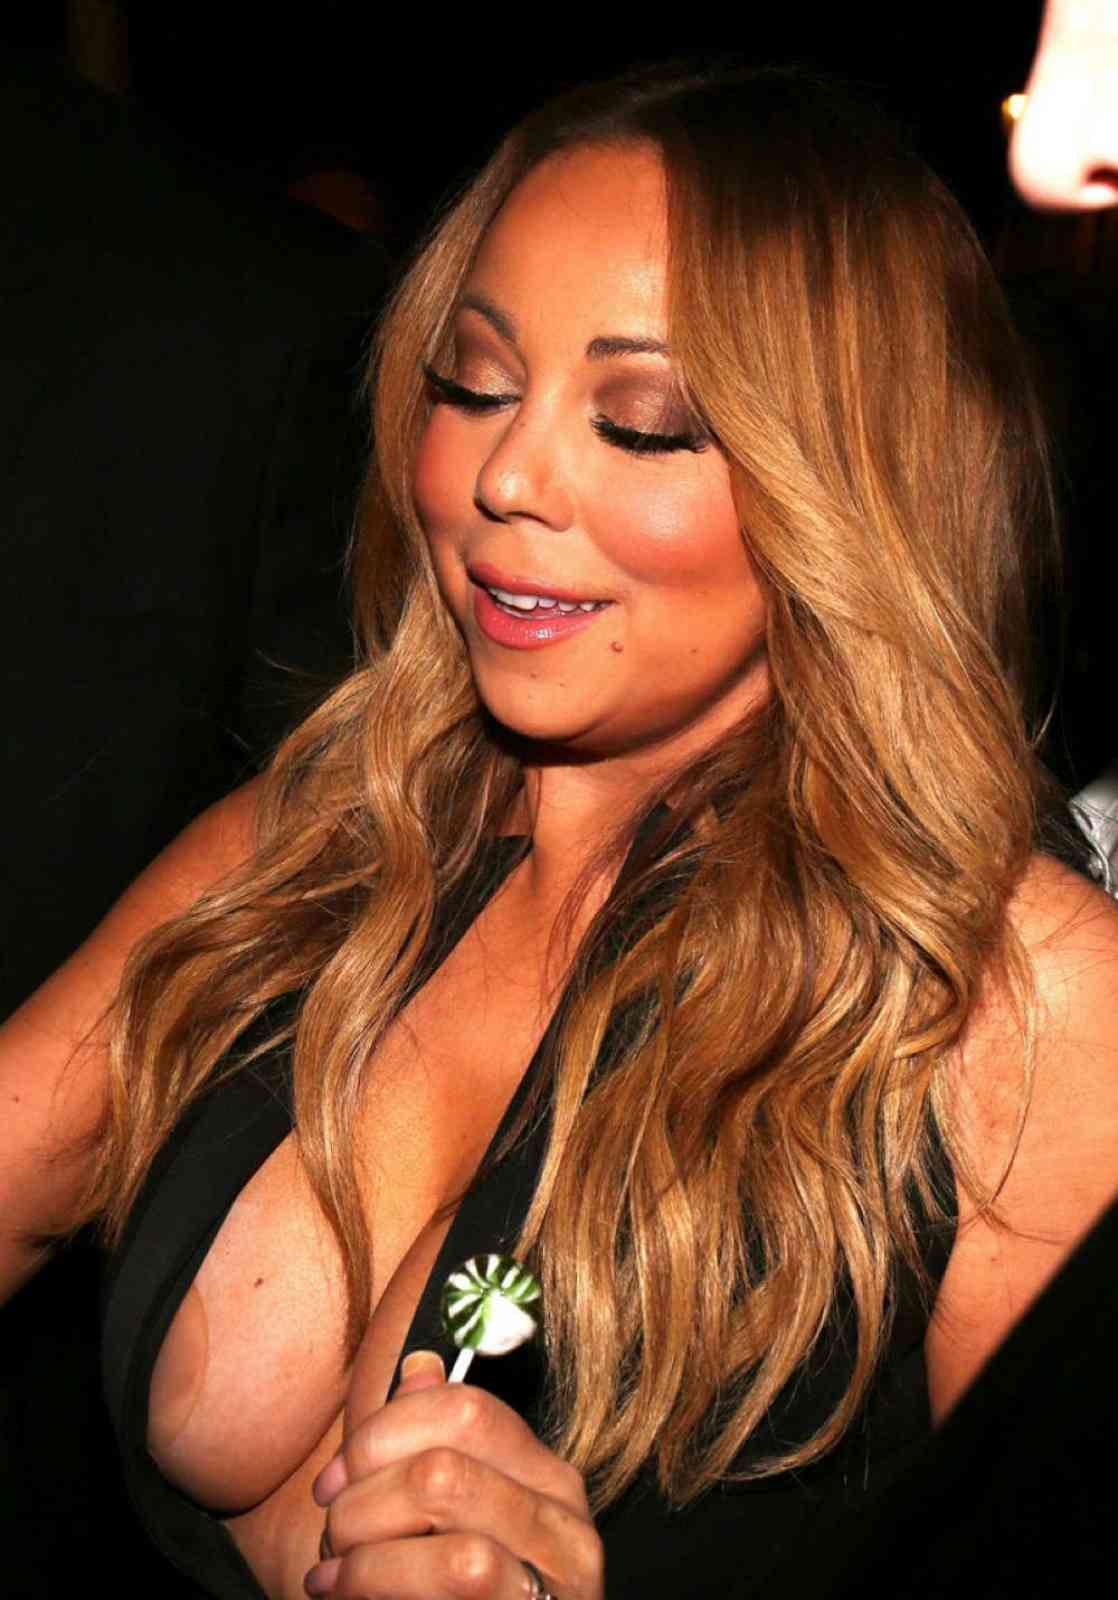 Shooting S. reccomend Mariah carey naked in bed pics